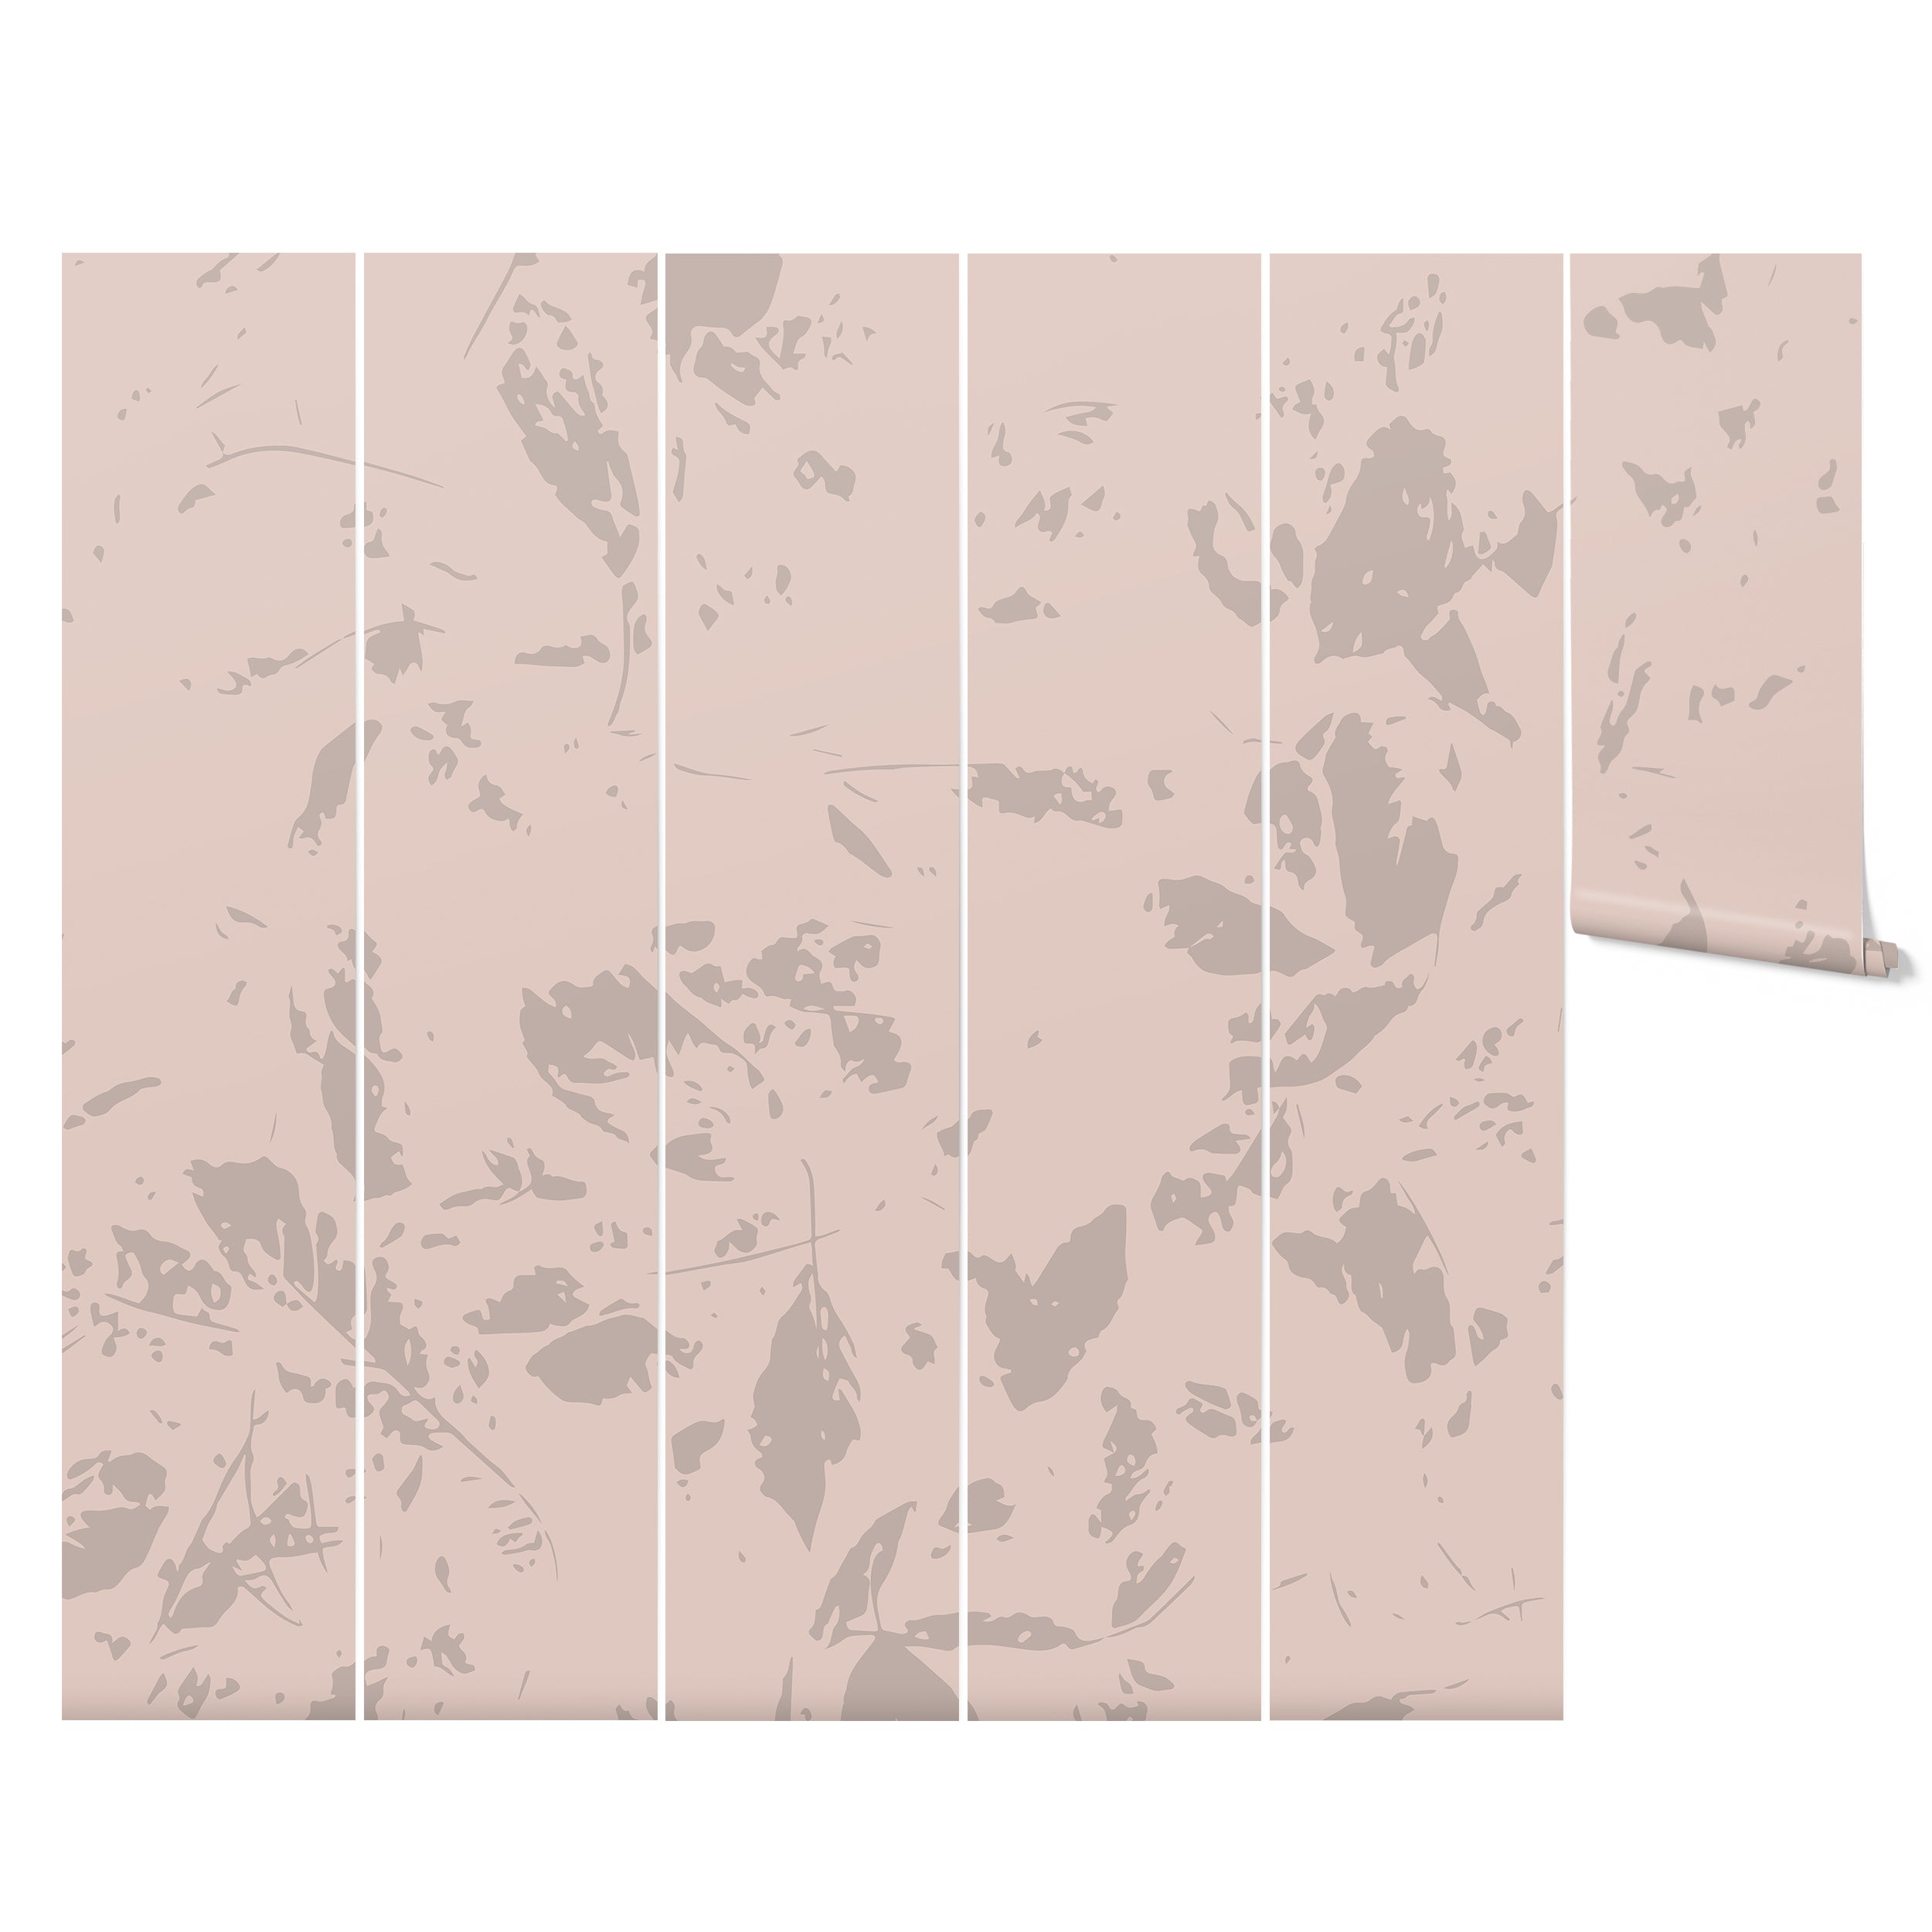 A roll of Abstract Floral - Floral Mural Wallpaper, displayed in a fan-like spread, revealing the gentle gray abstract floral designs on a blush pink background. The pattern is both artistic and soothing, suitable for adding a touch of elegance to any interior.